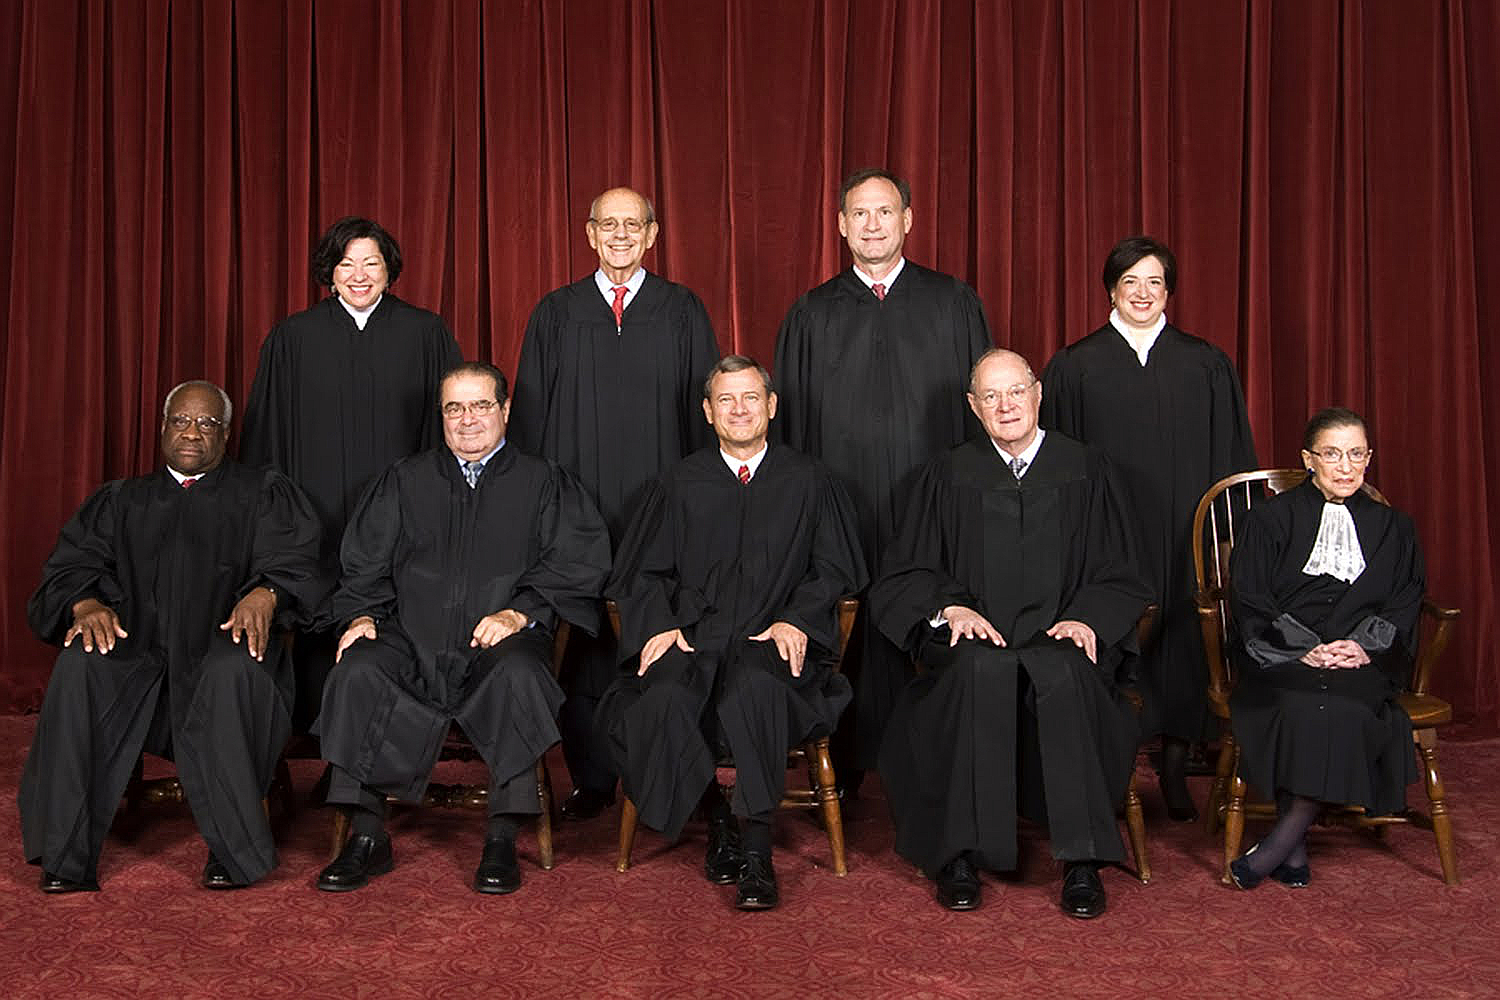 CLUELESS: Most Americans can’t name a single U.S. Supreme Court justice